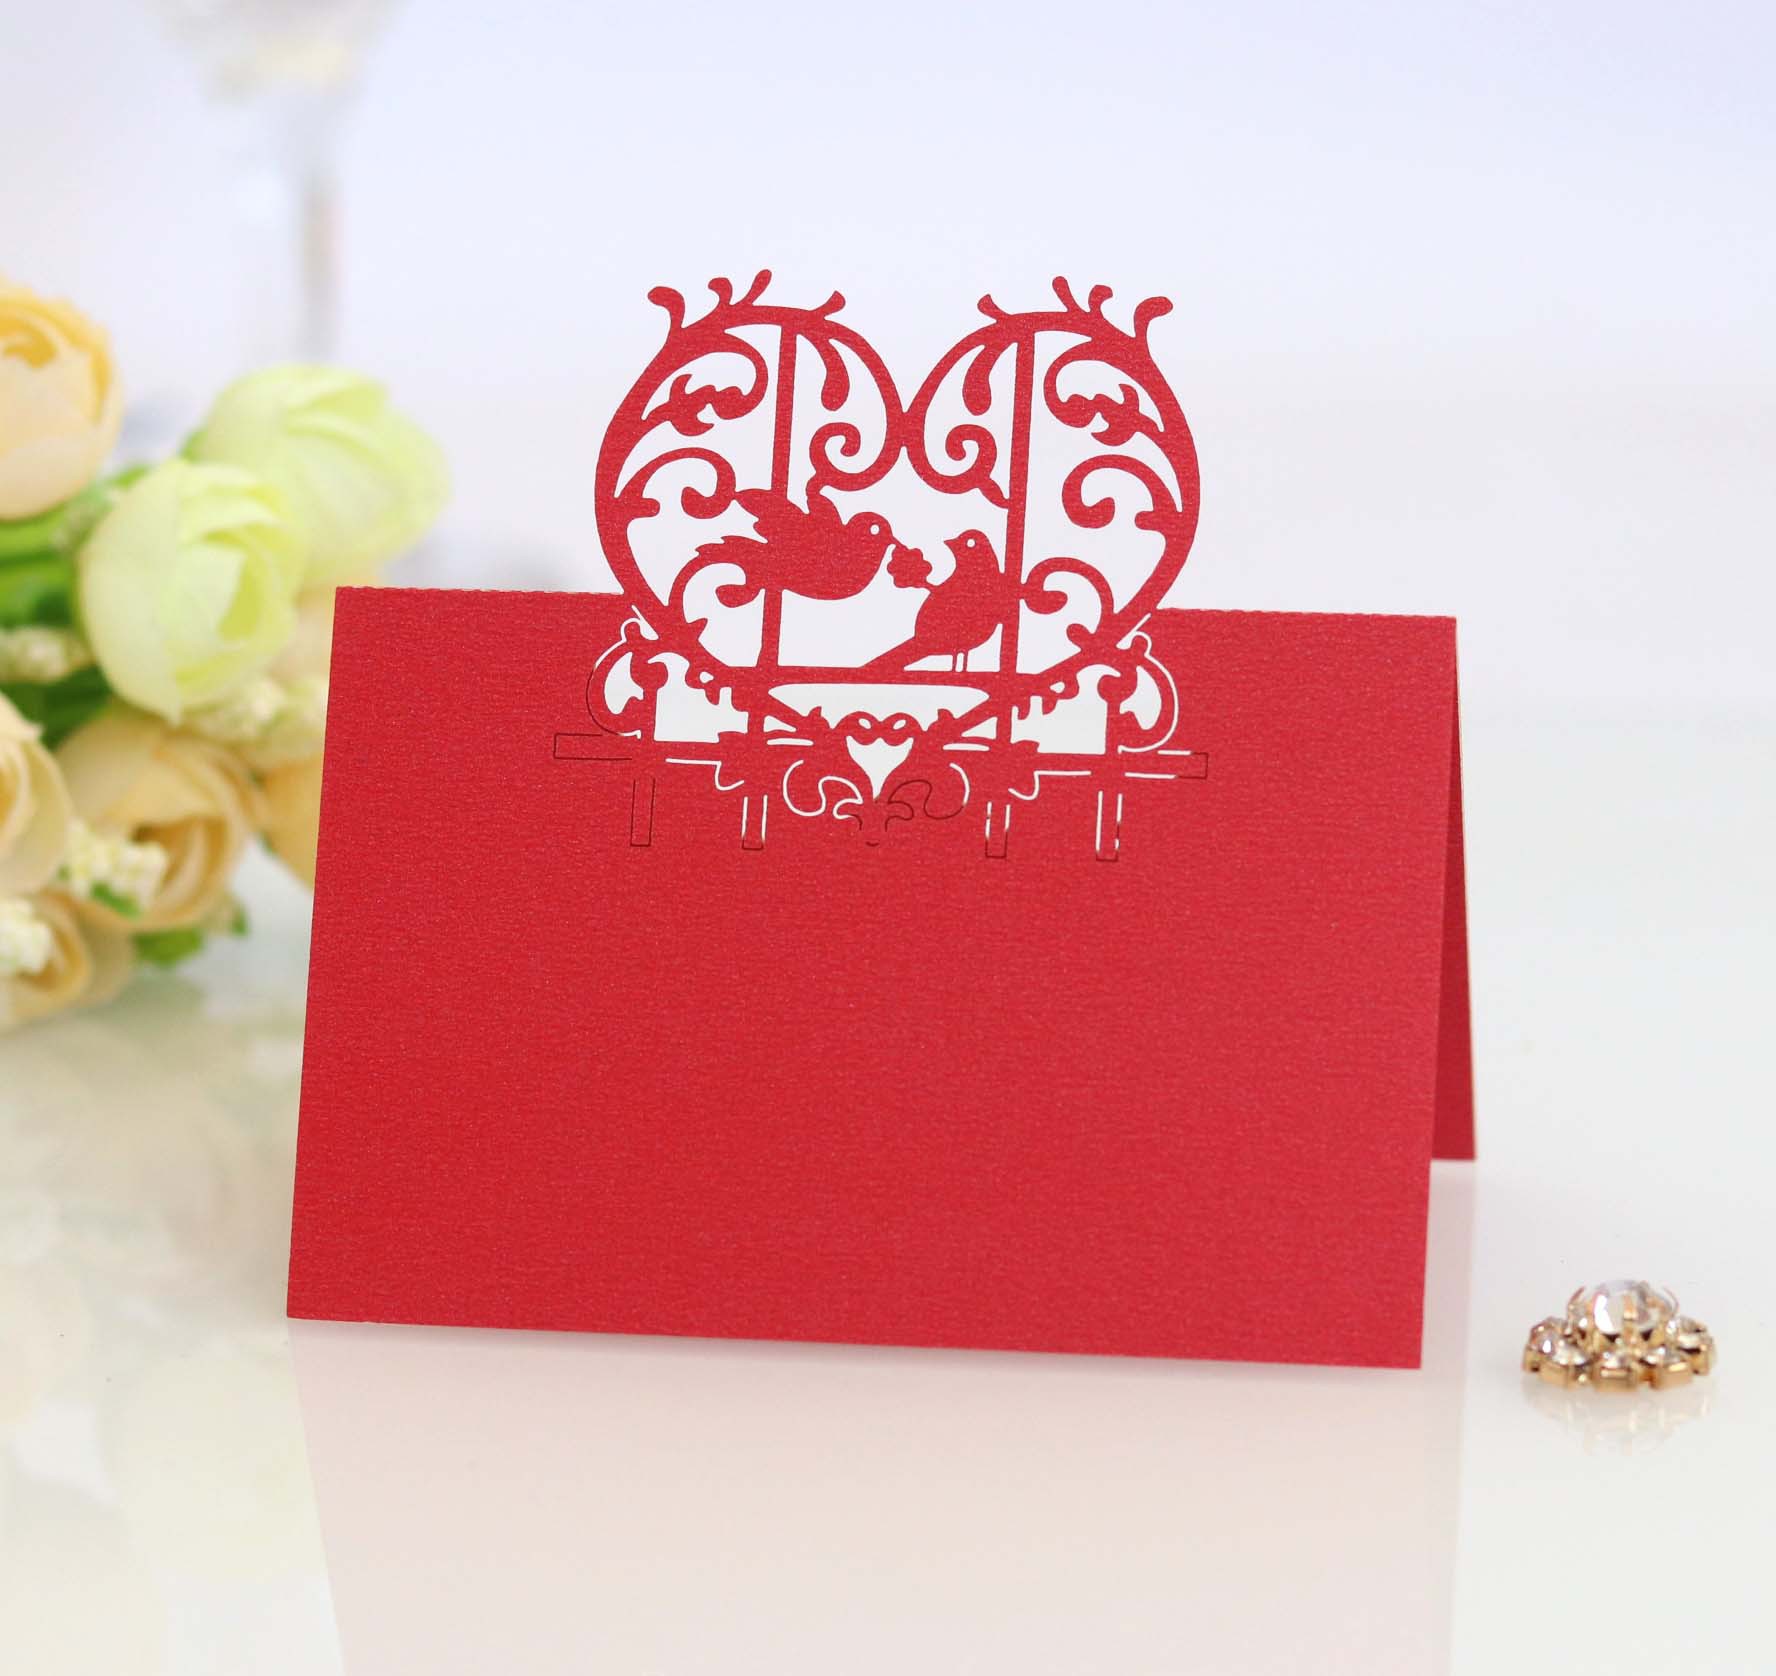 Wedding Decorations Laser Cut Place Cards With Hearts Paper Carving Name Cards For Party Table Seating